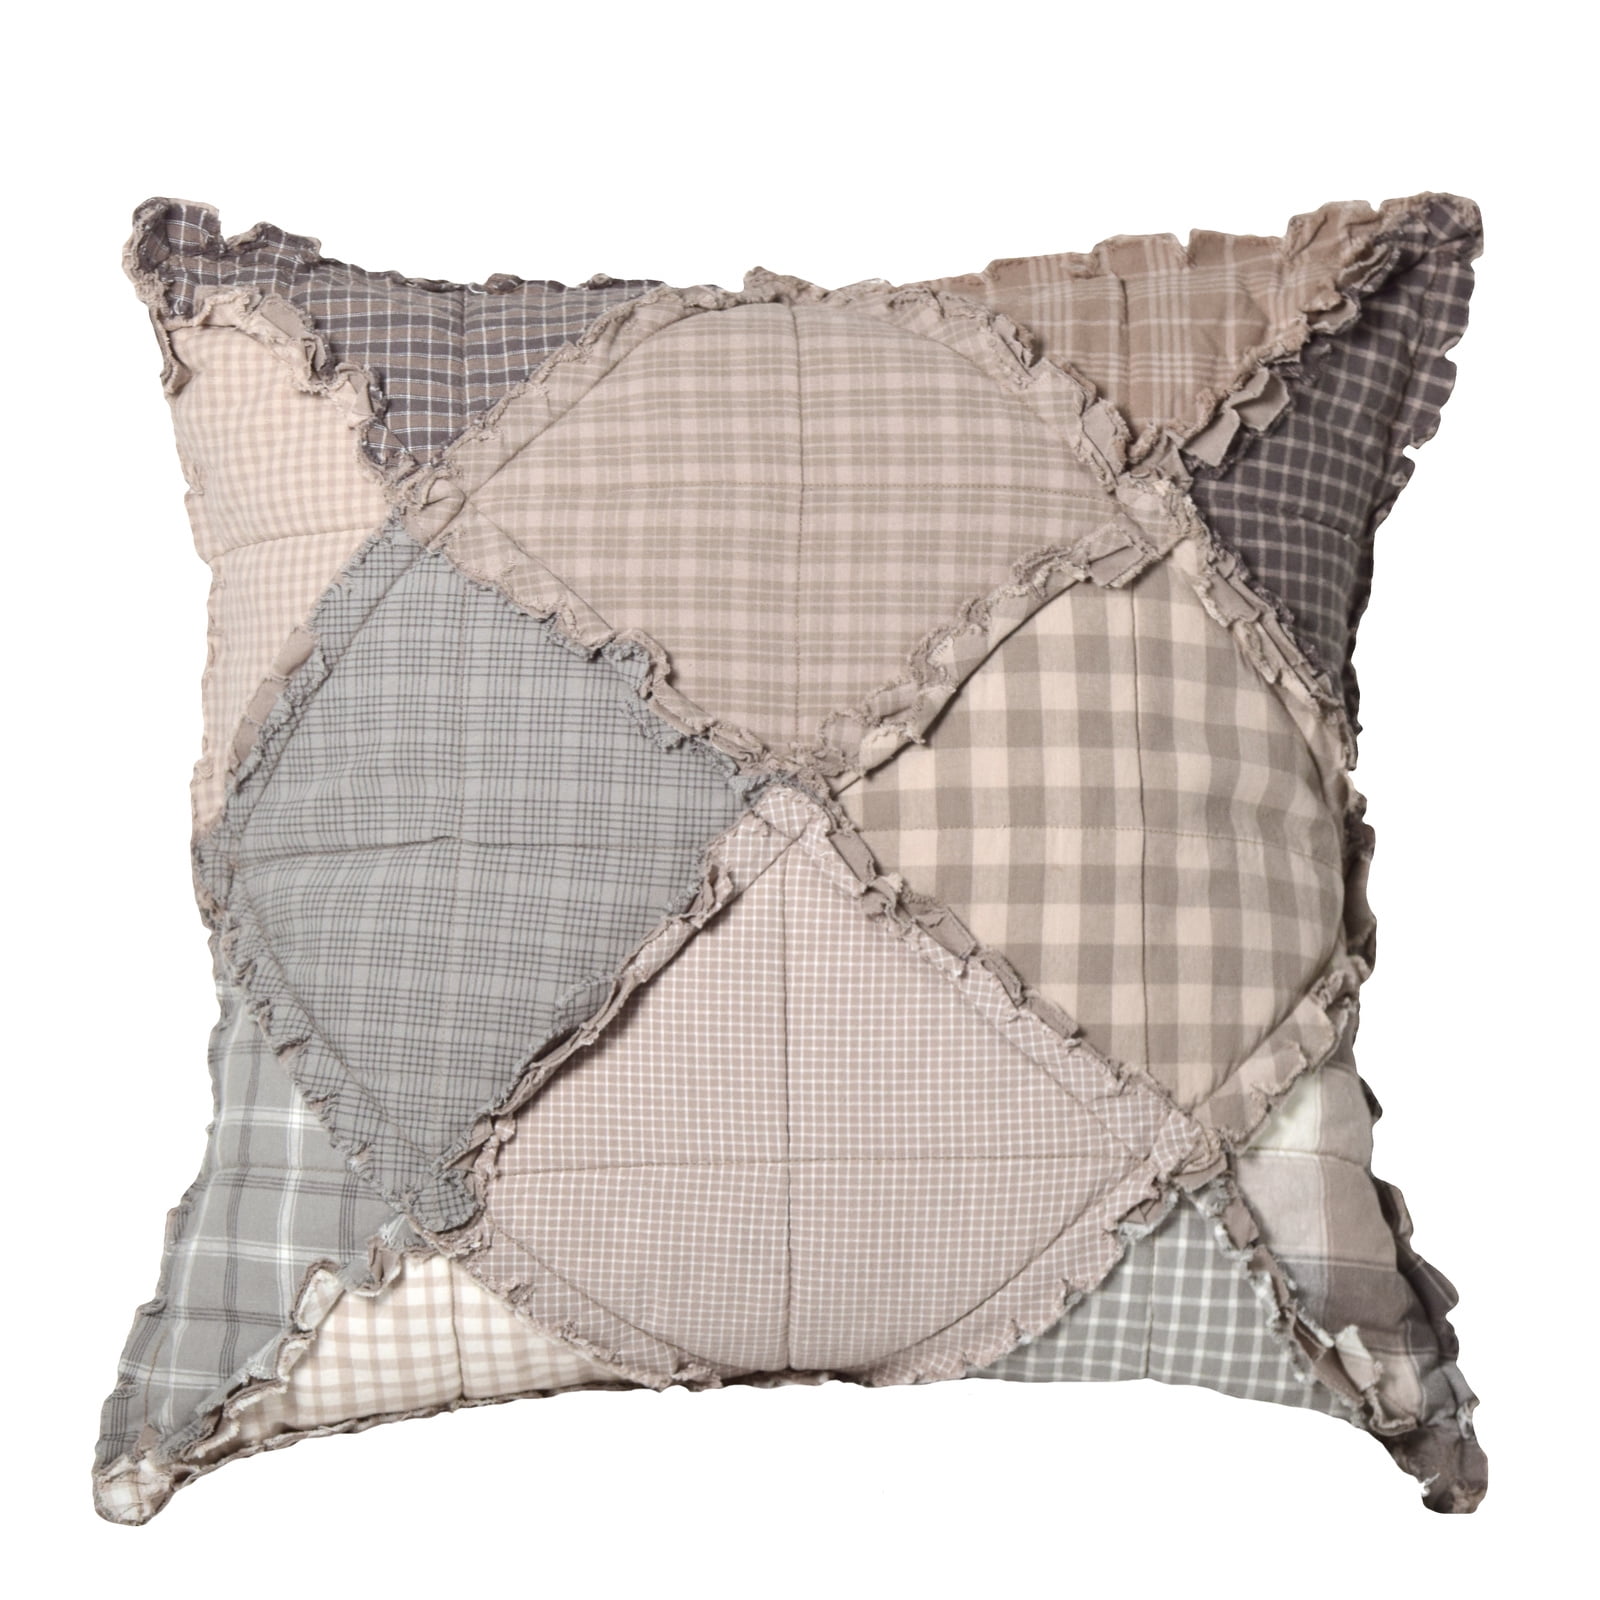 Throw Pillow - Smoky Mountain by Donna Sharp - Contemporary Decorative  Throw Pillow with Patchwork Pattern - Square - Walmart.com